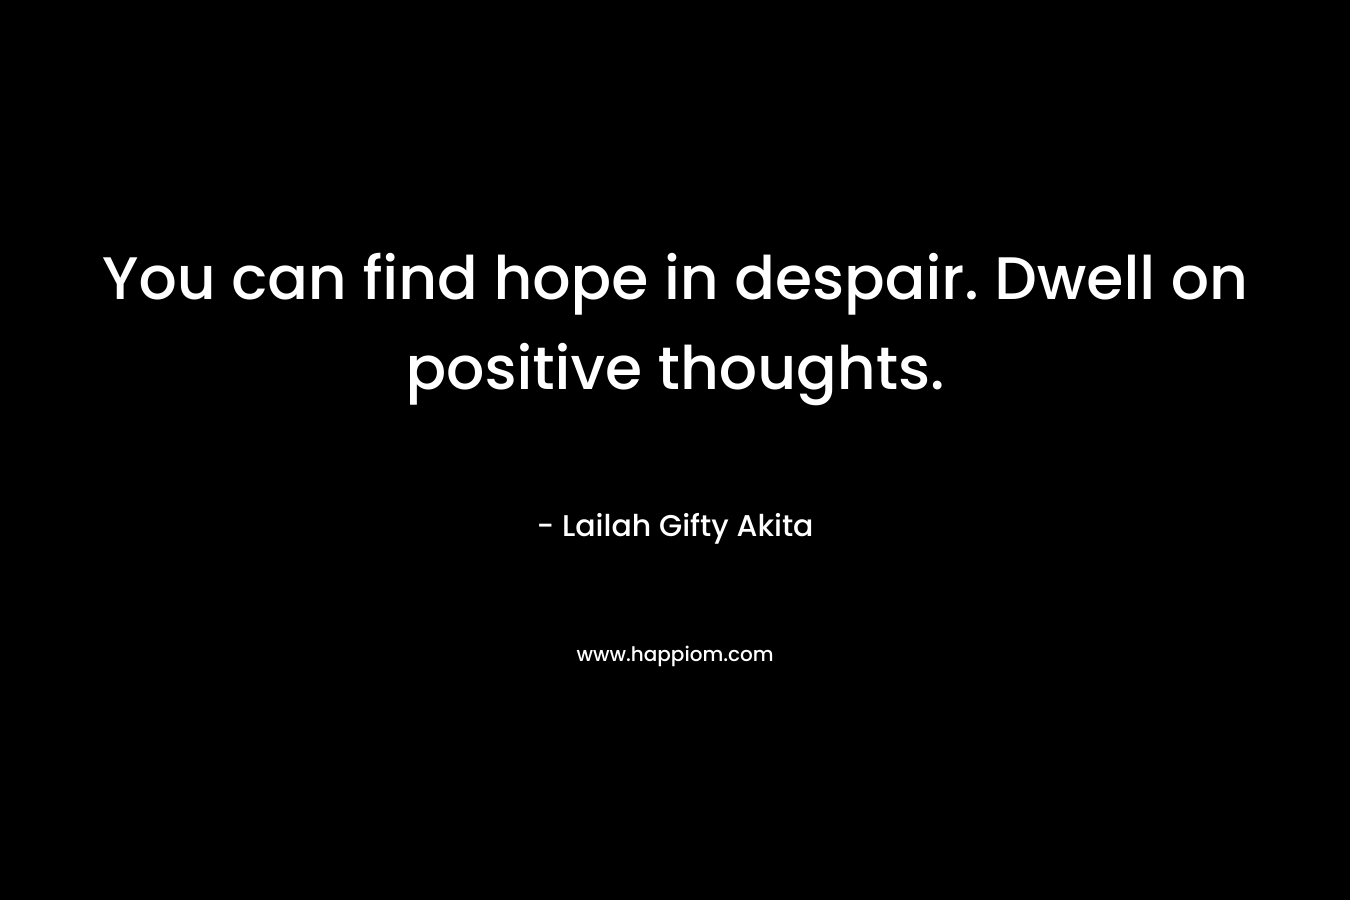 You can find hope in despair. Dwell on positive thoughts.